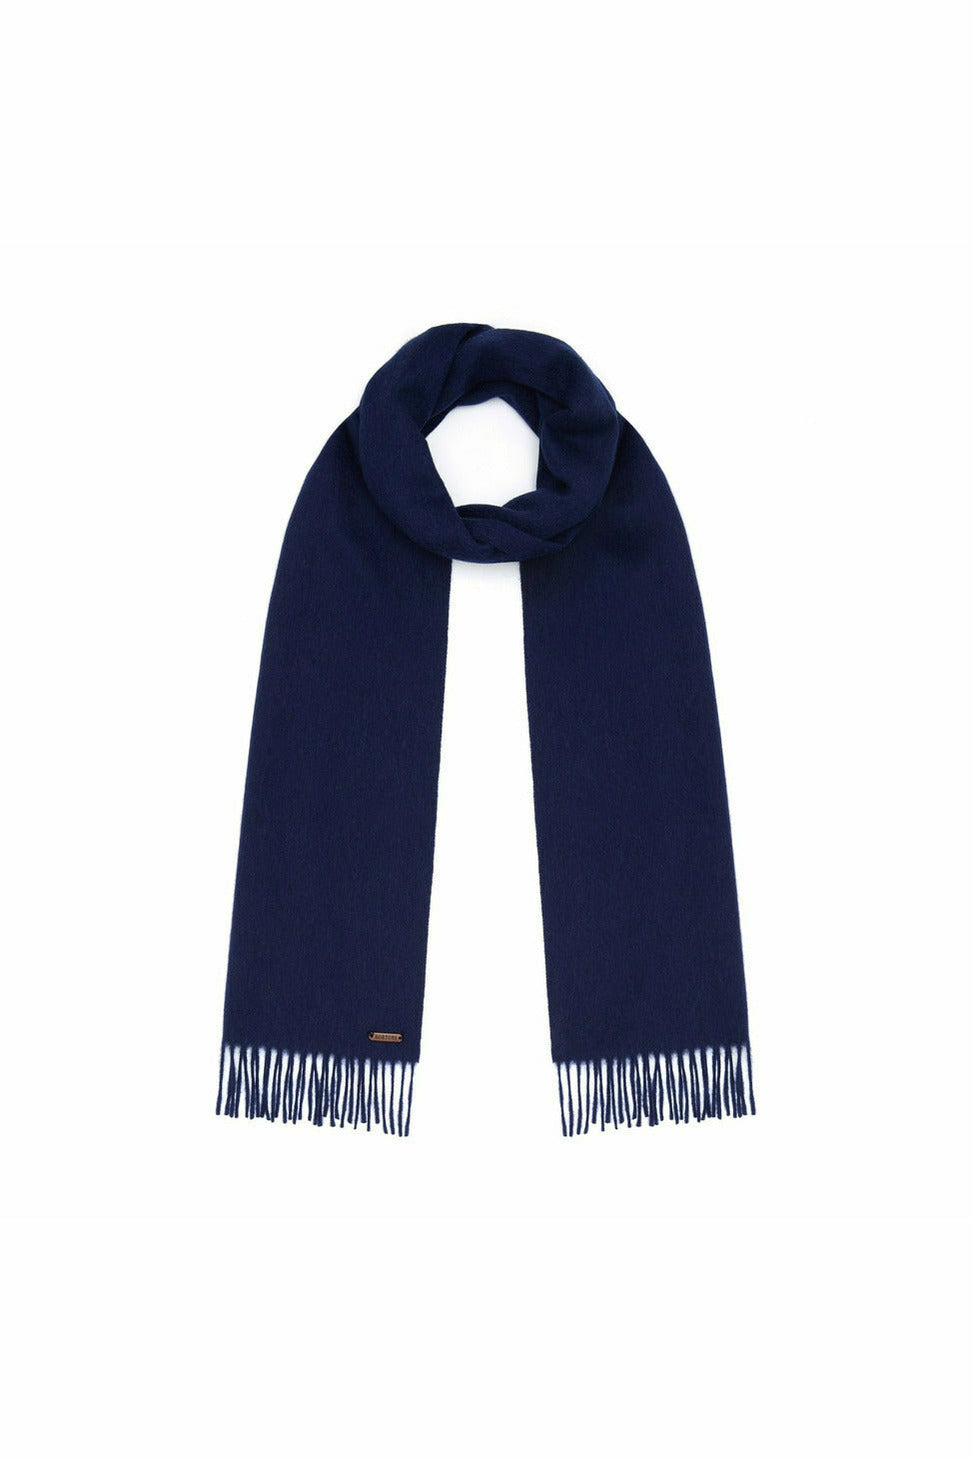 Lindo  Womens scarves winter, Scarf women fashion, How to wear scarves